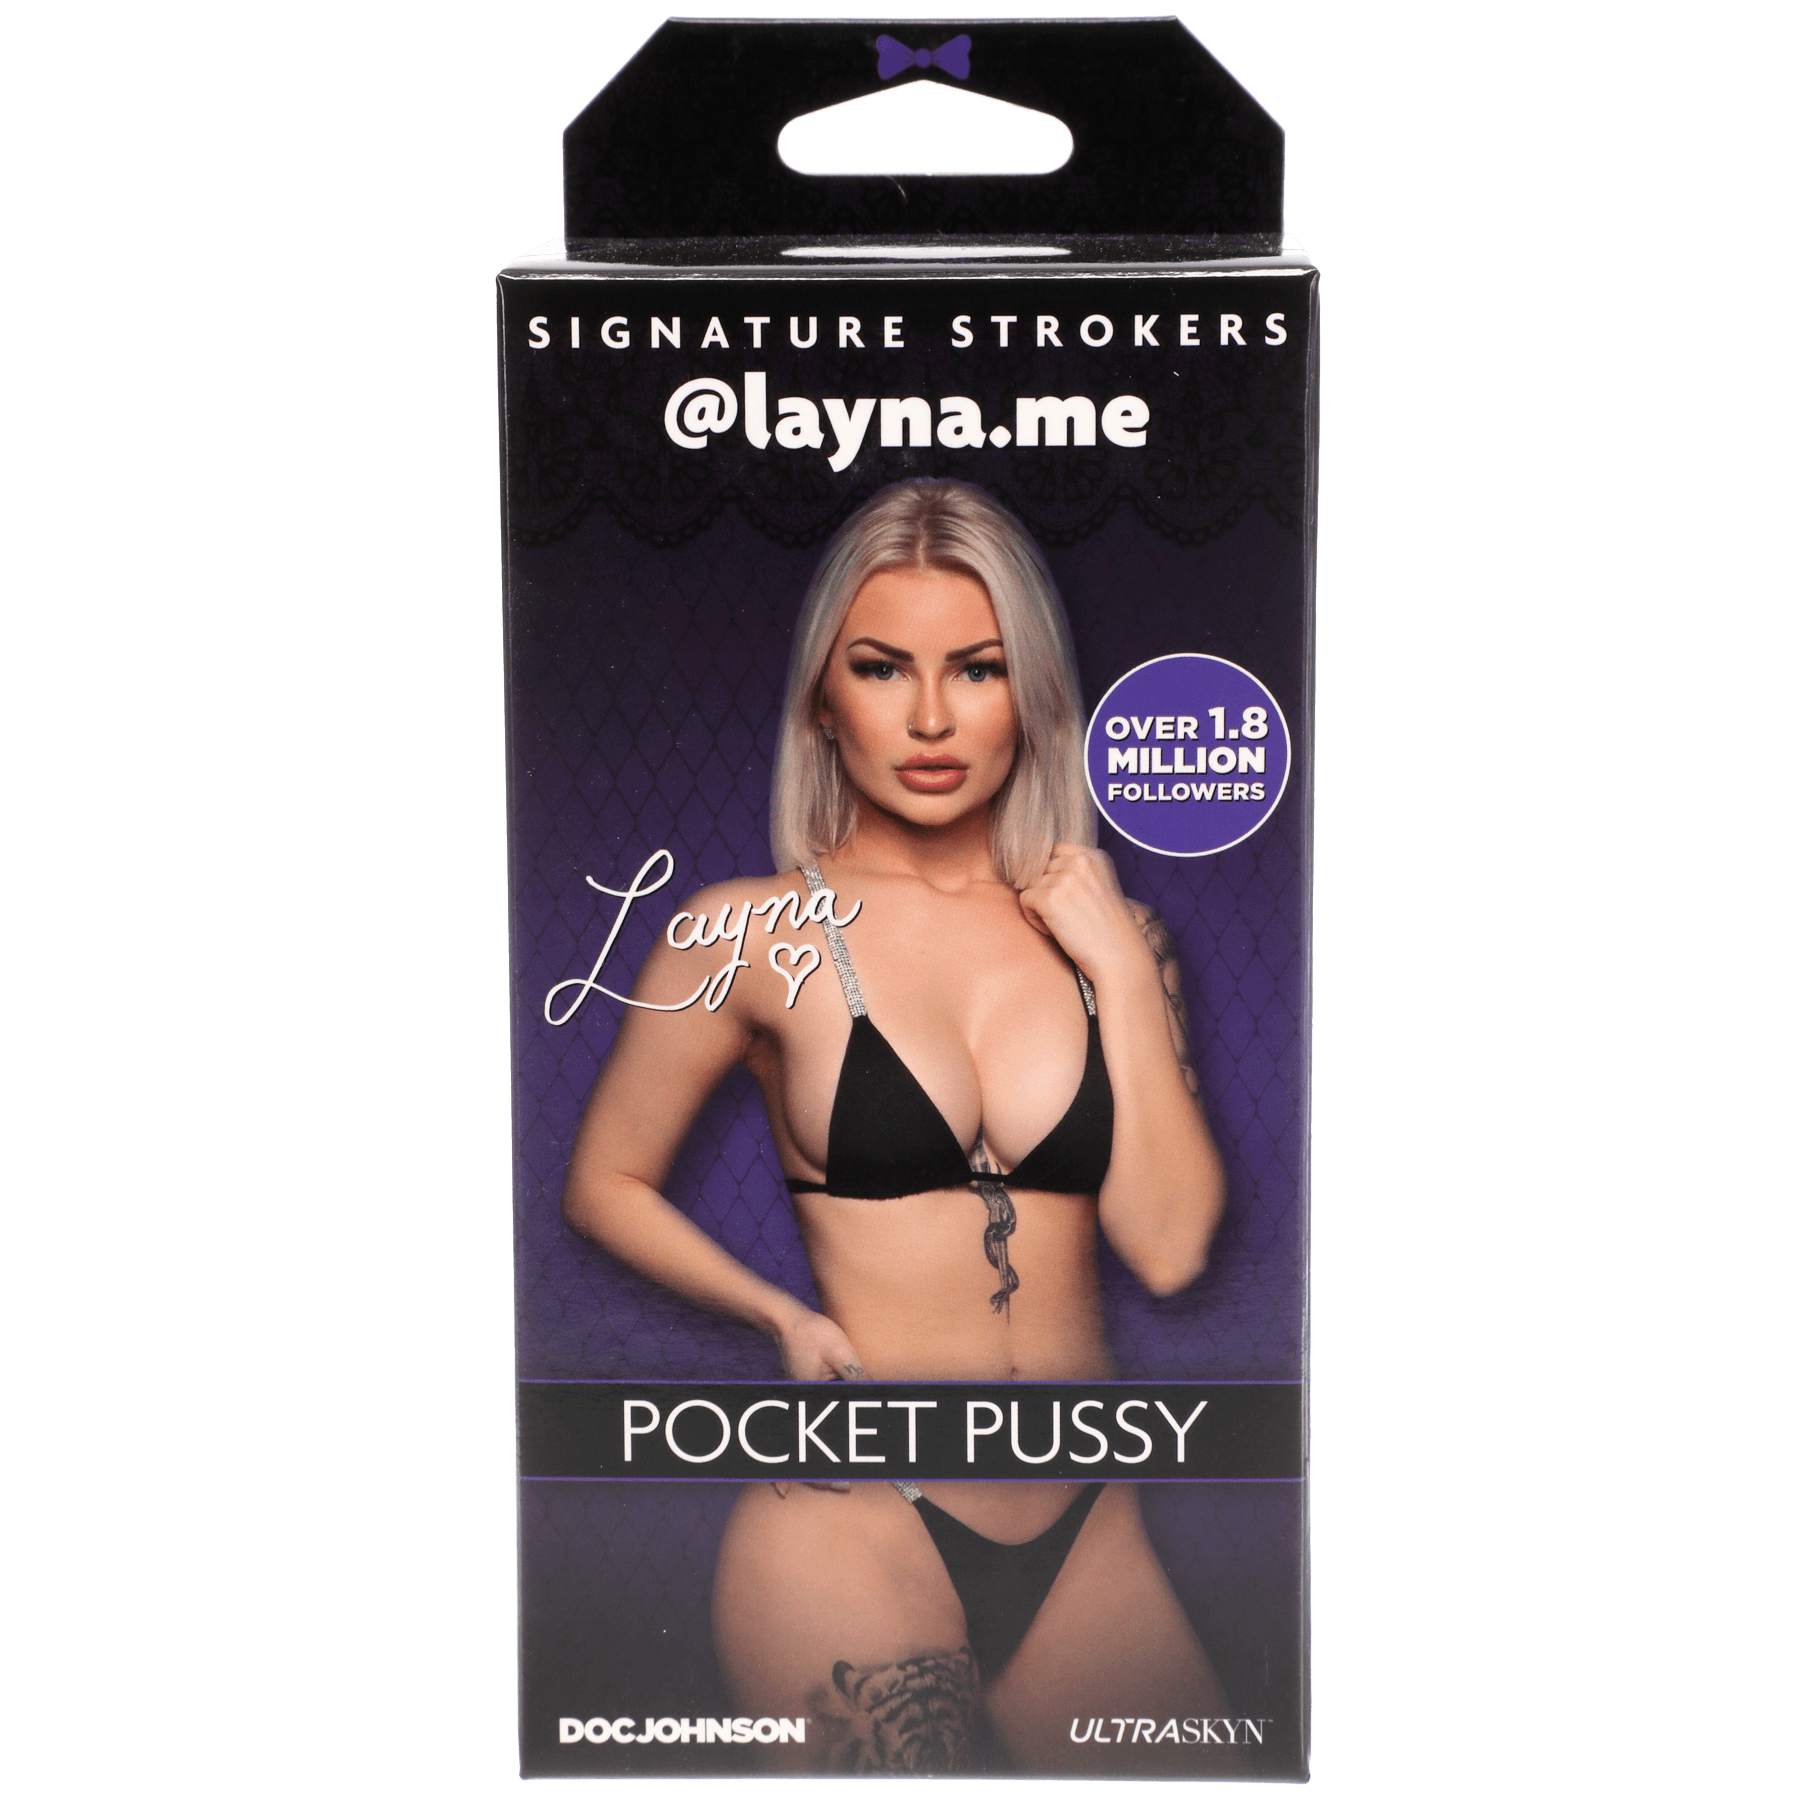 Signature Strokers Girls of Social Media @layna.me - Buy At Luxury Toy X - Free 3-Day Shipping